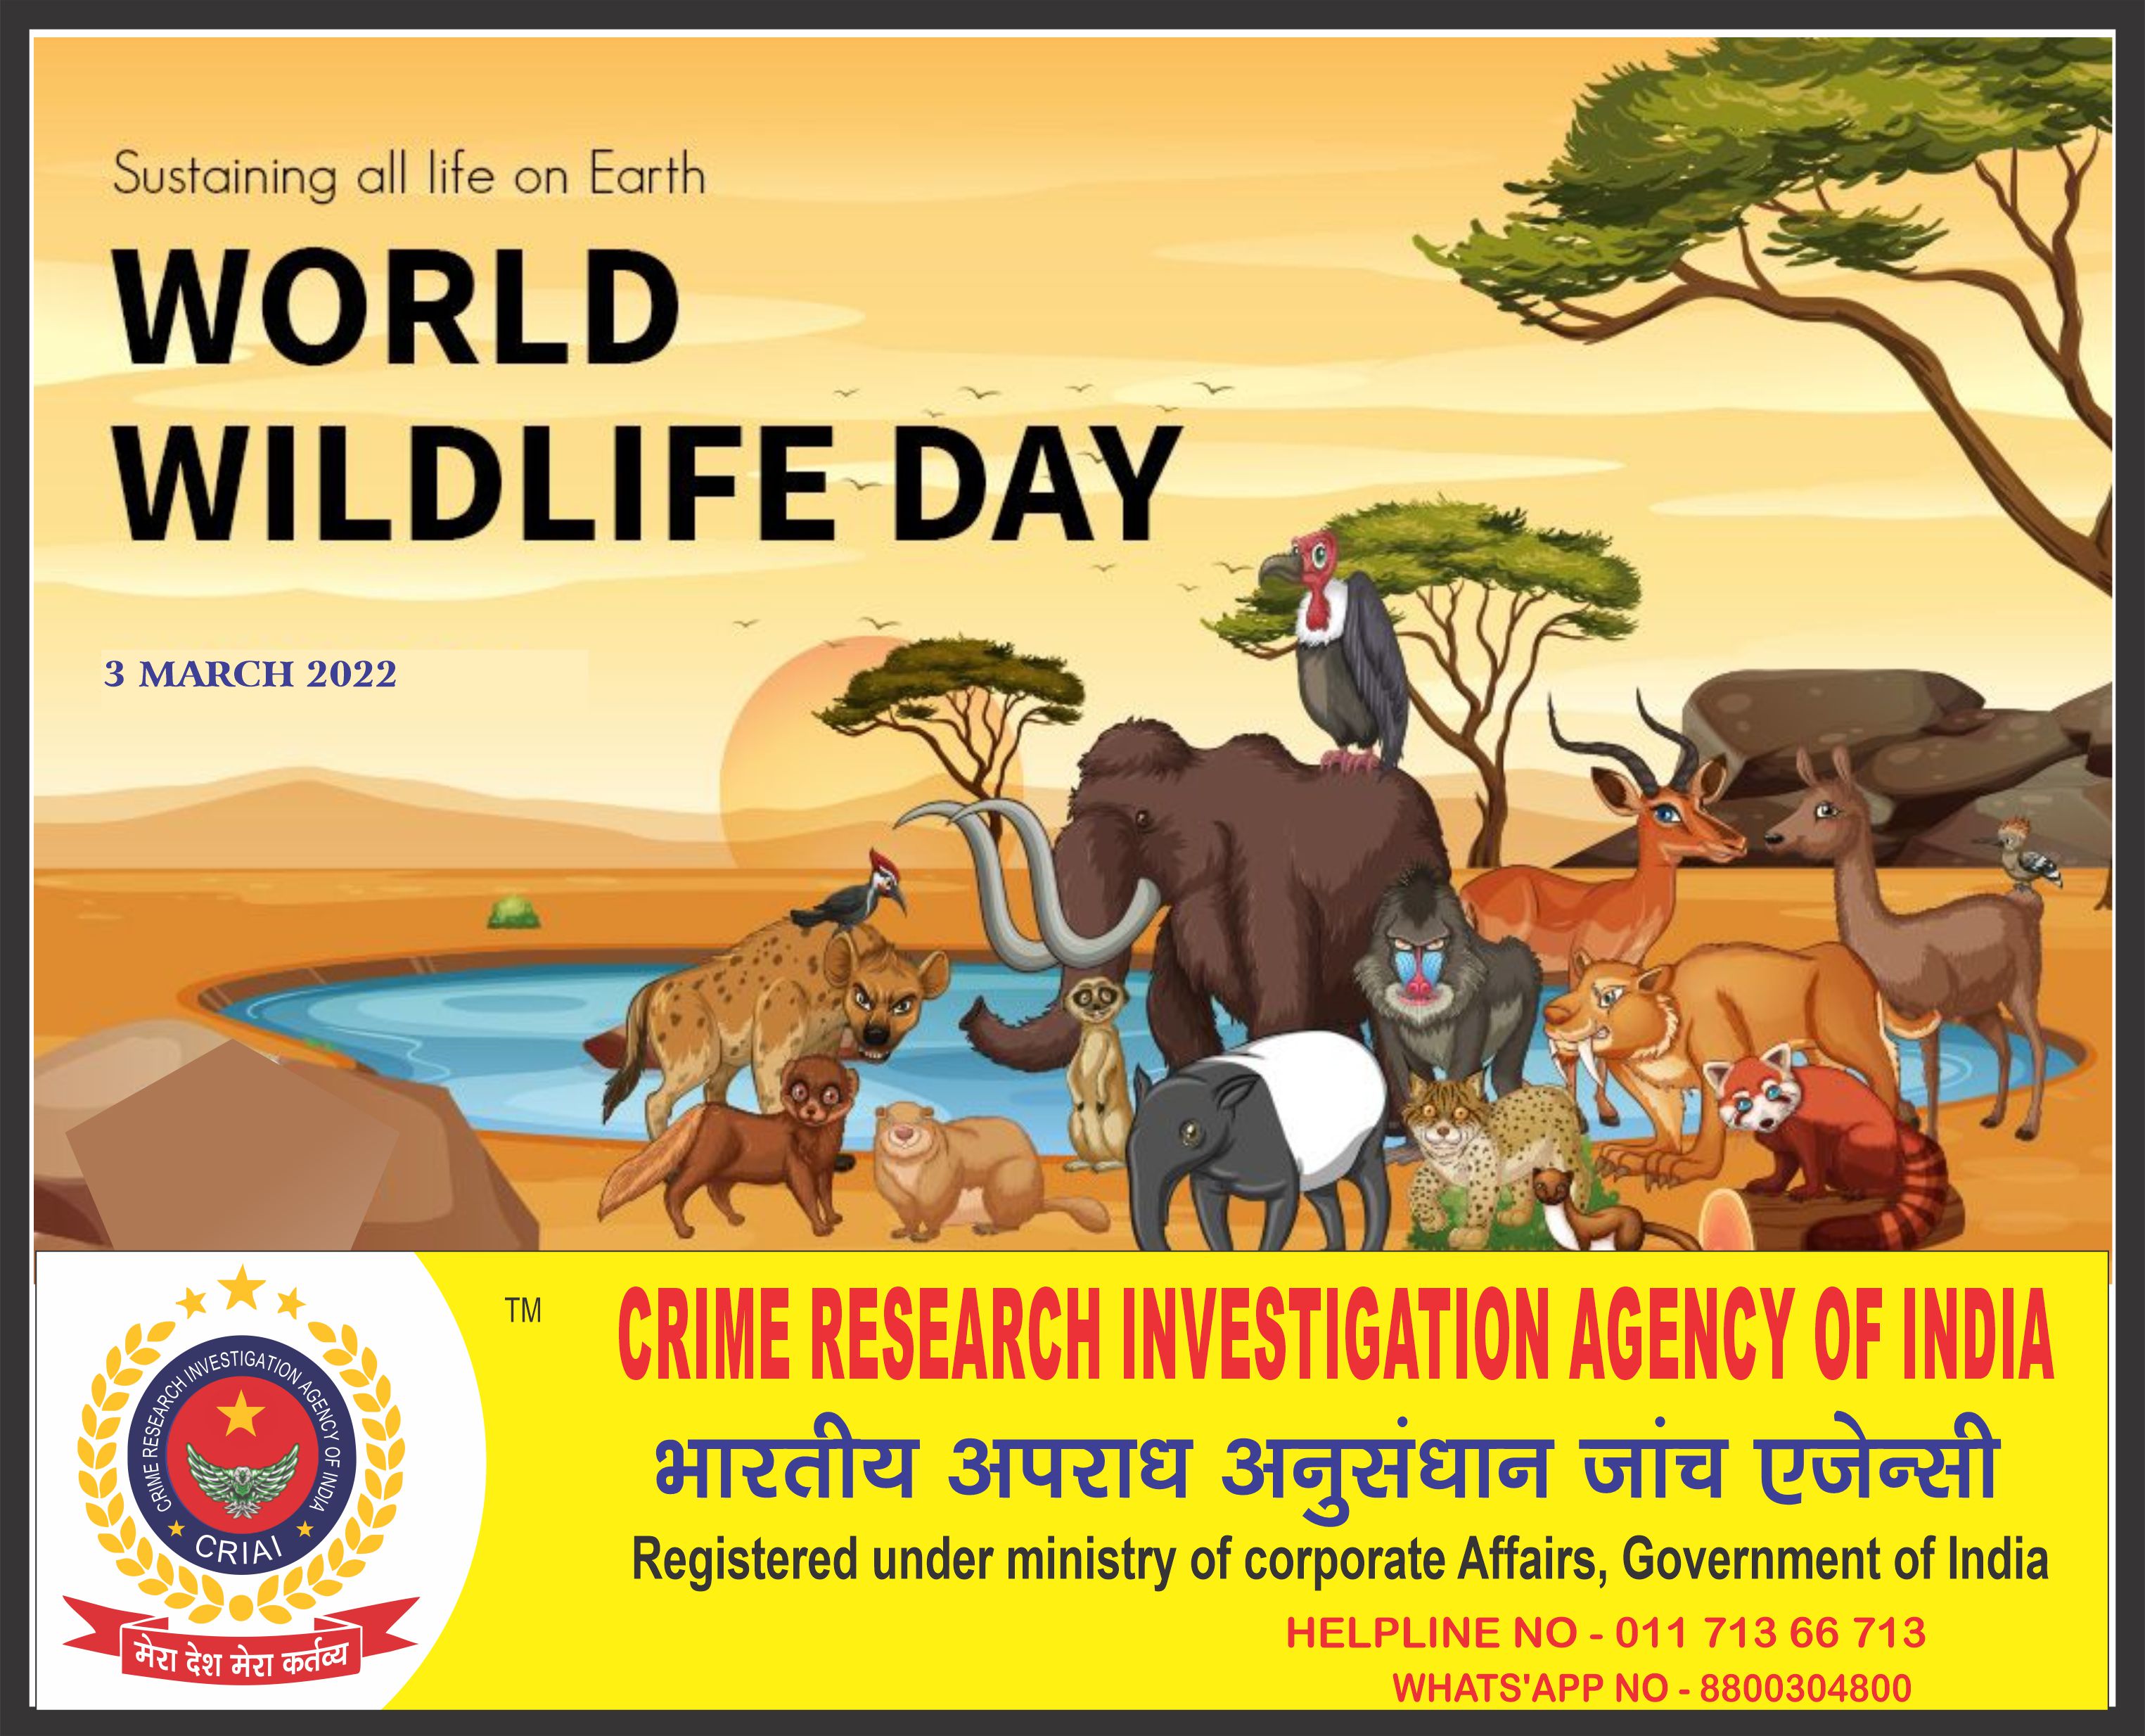 raise-your-voice-save-animals-save-beauty-of-forest-being-destroyed-happy-world-wildlife-day